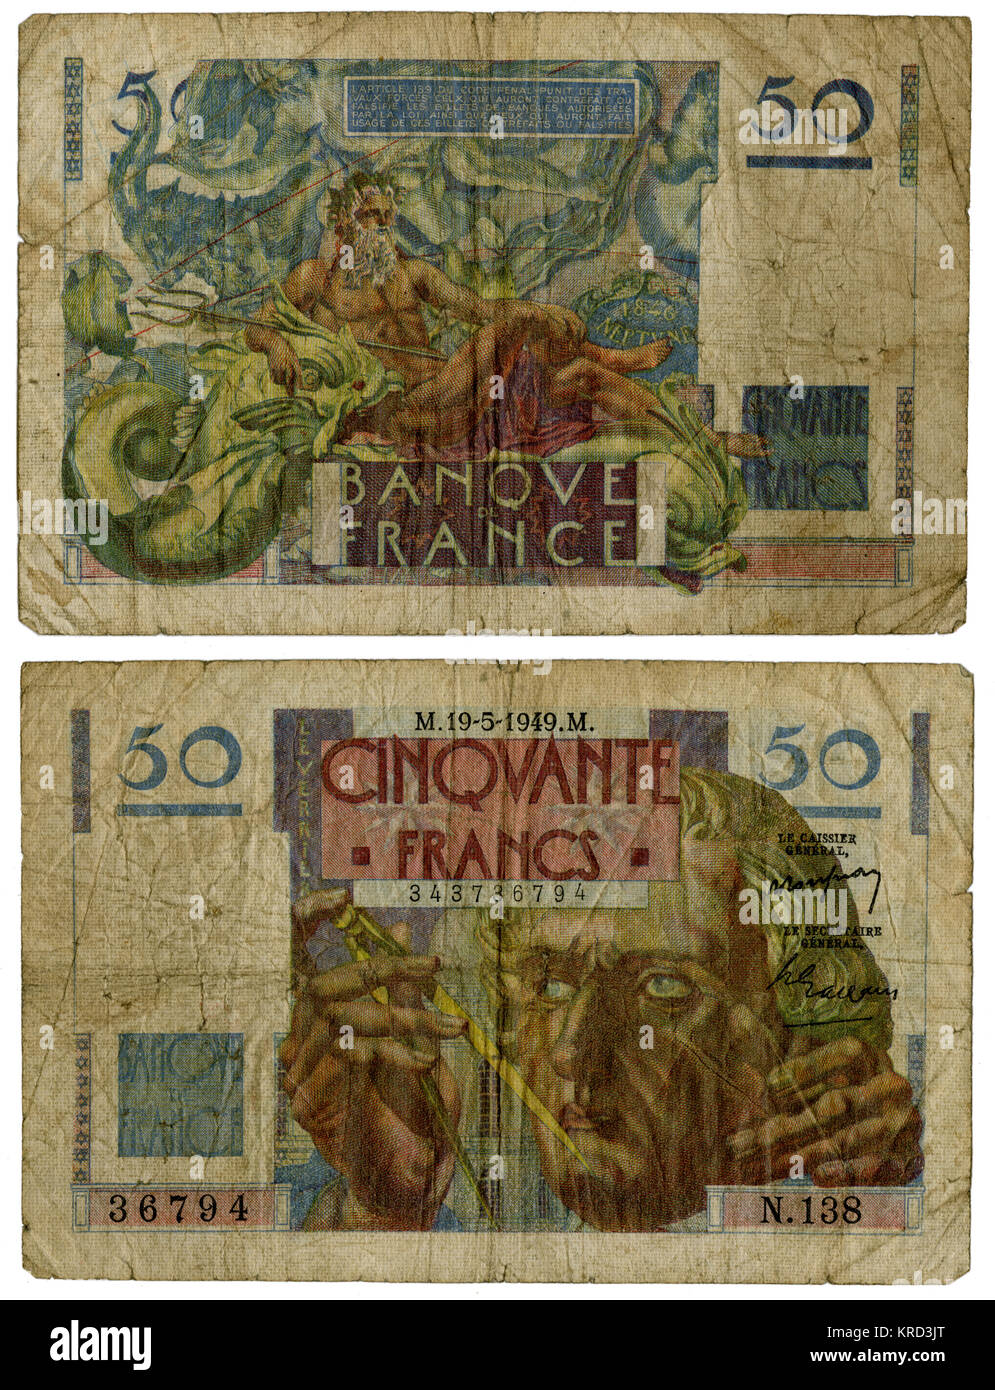 French bank note, Banque de France, 50 Francs, issued on 19 May 1949.  With a portrait of the French mathematician and astronomer Urbain Jean Joseph Le Verrier (1811-1877) on the front, and Neptune on the back.  Le Verrier took part in the discovery of the planet Neptune in 1846.      Date: 1949 Stock Photo